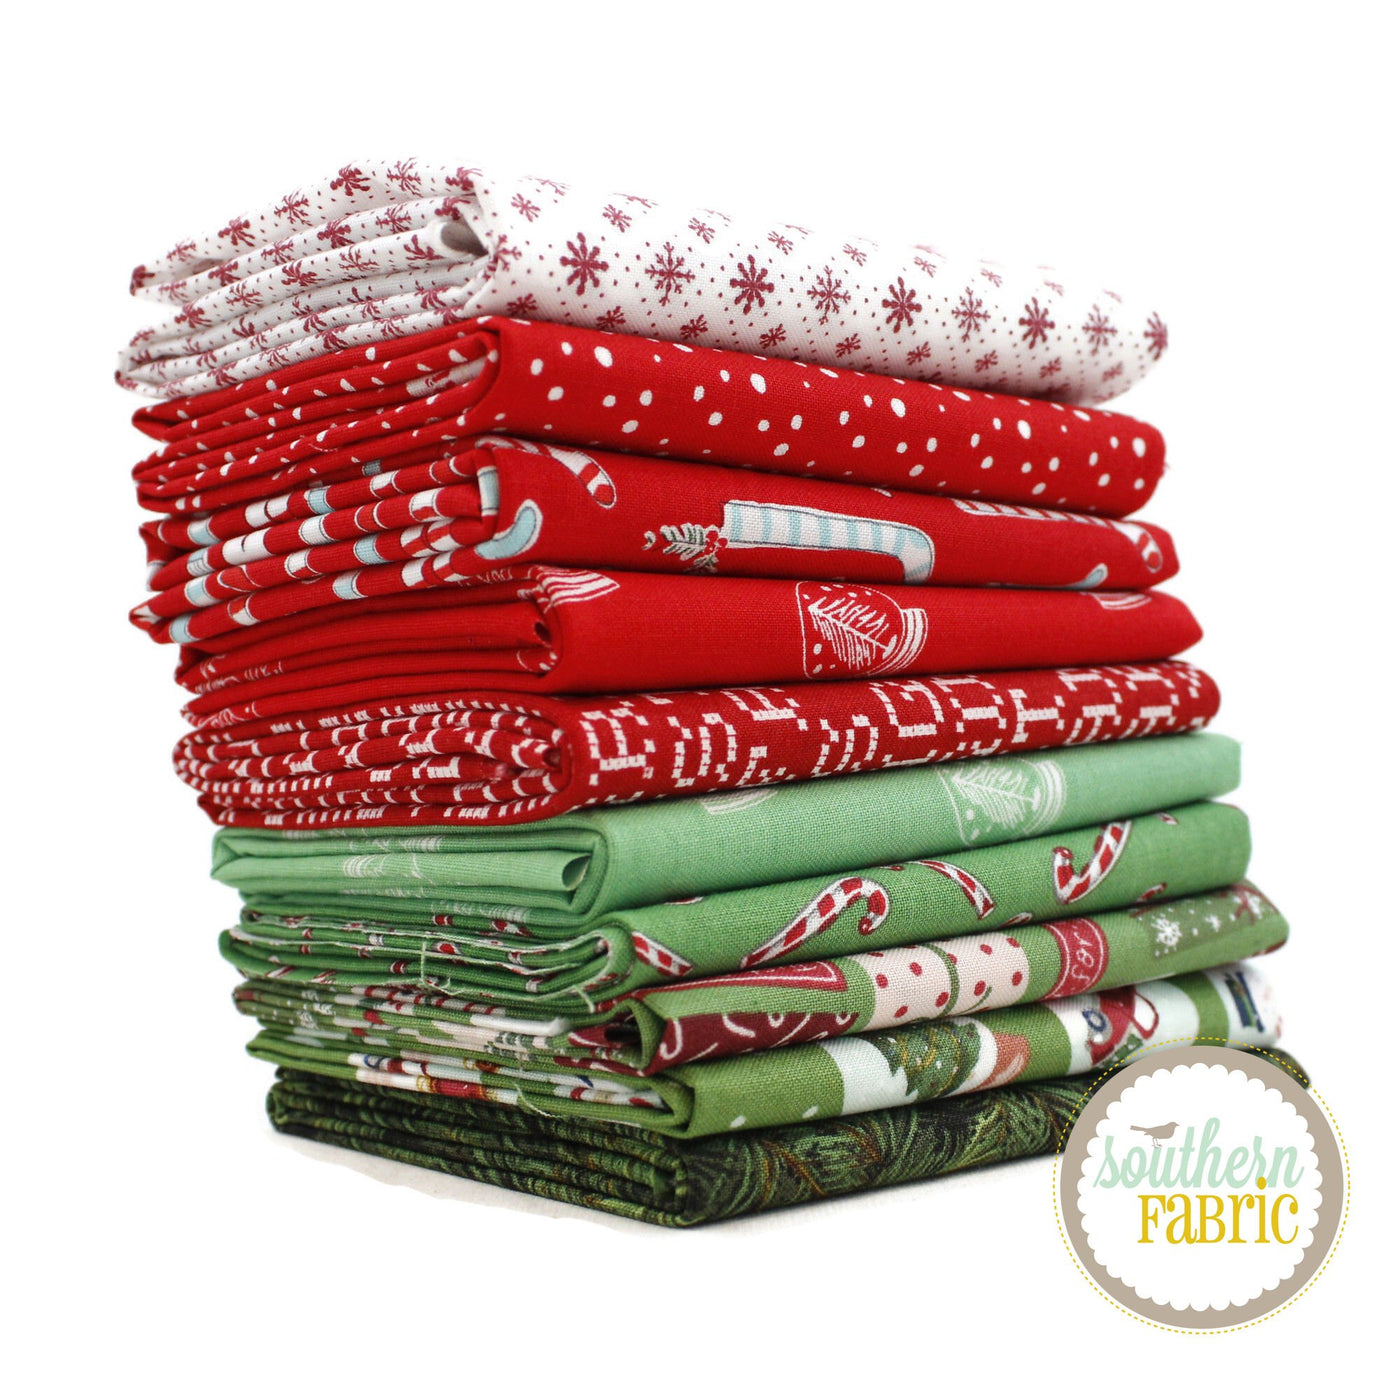 Christmas Scrap Bag (approx 2 yards) by Mixed Designers for Southern Fabric